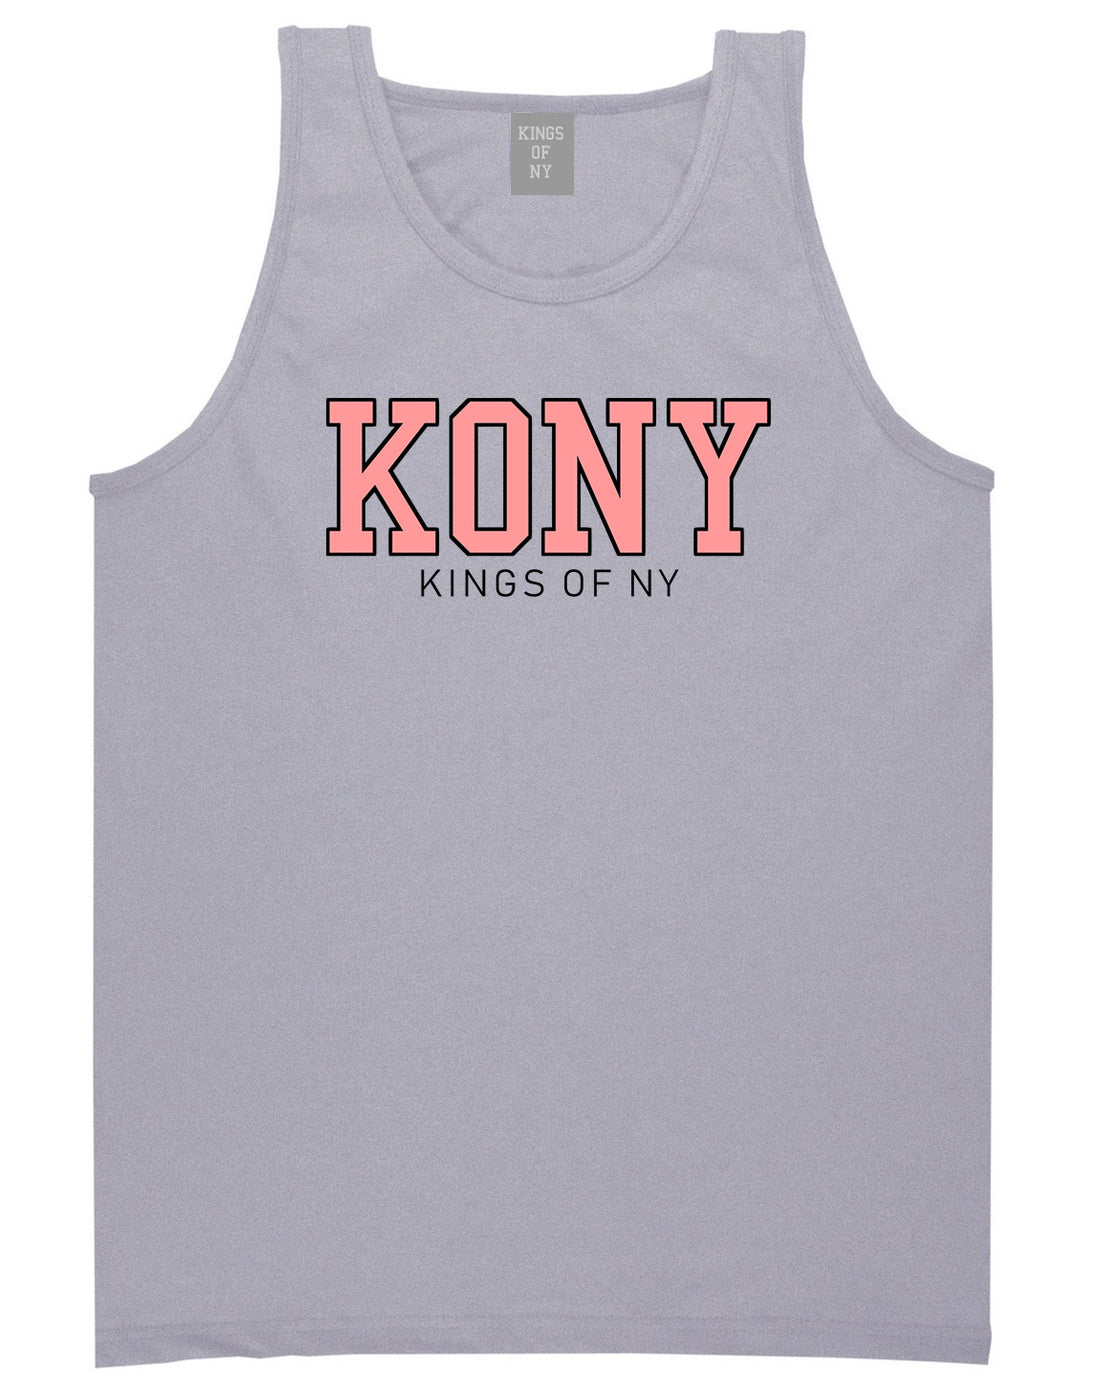 KONY College Mens Tank Top Shirt Grey by Kings Of NY